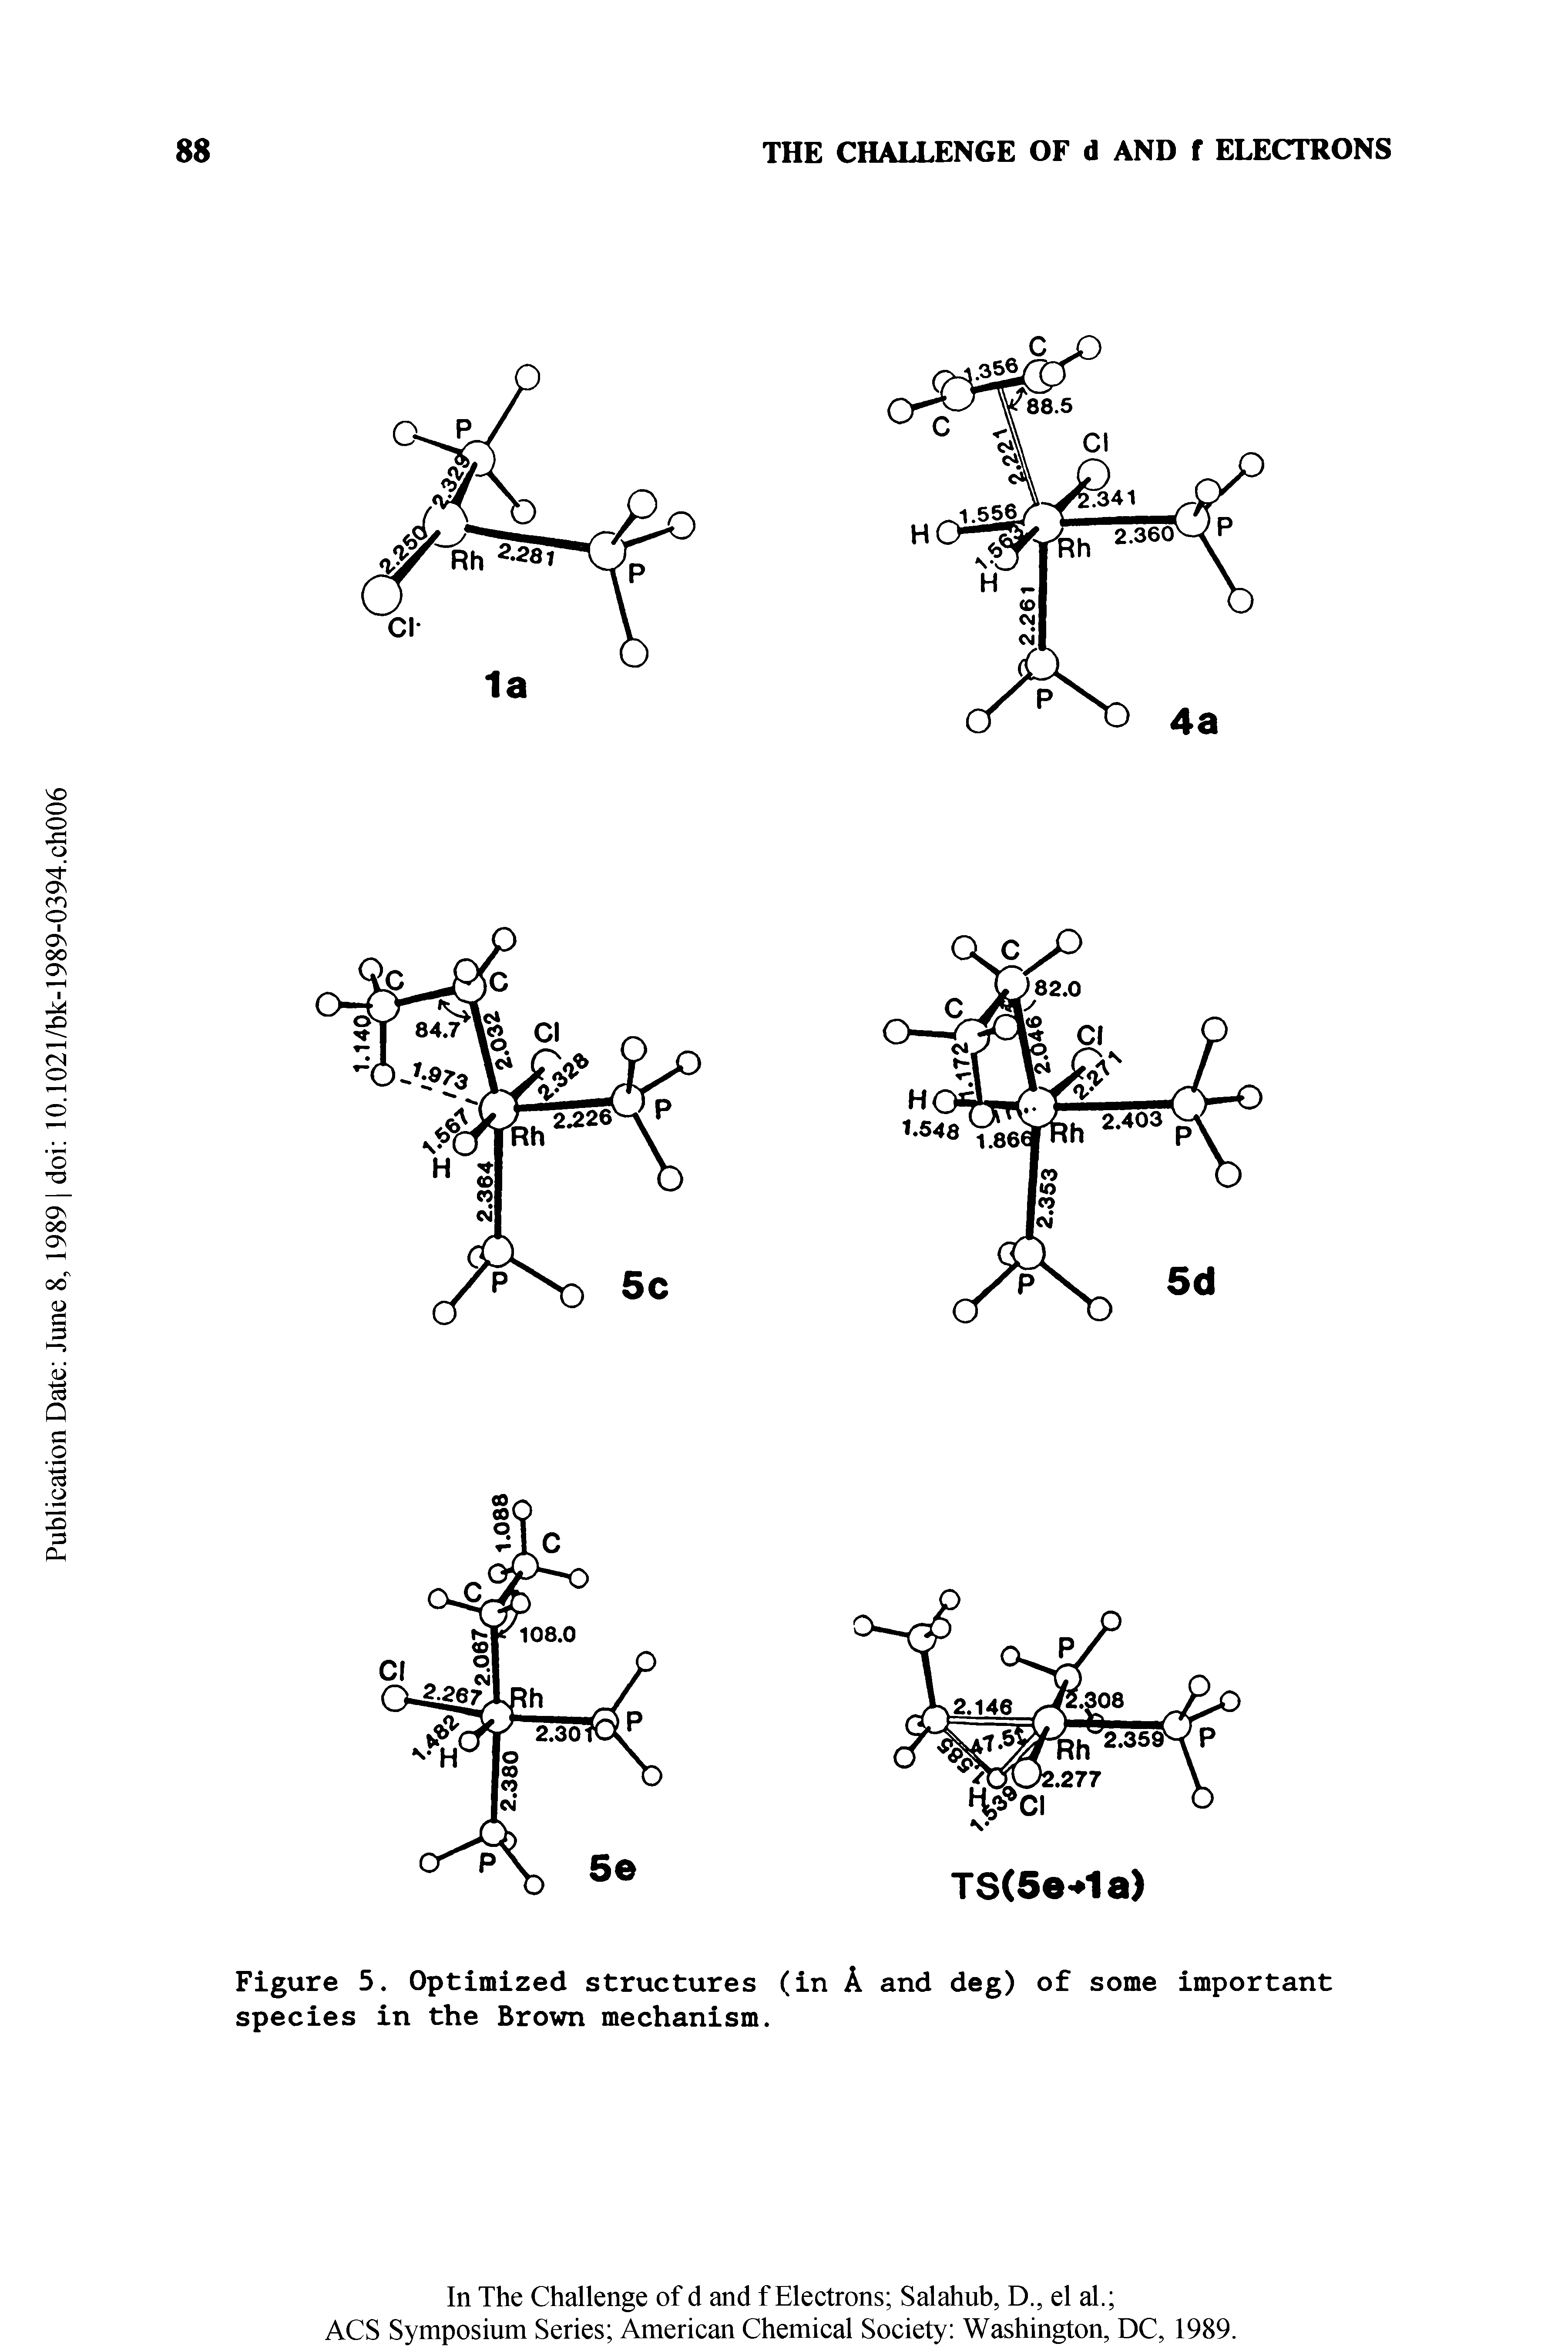 Figure 5. Optimized structures (in A and deg) of some important species in the Brown mechanism.